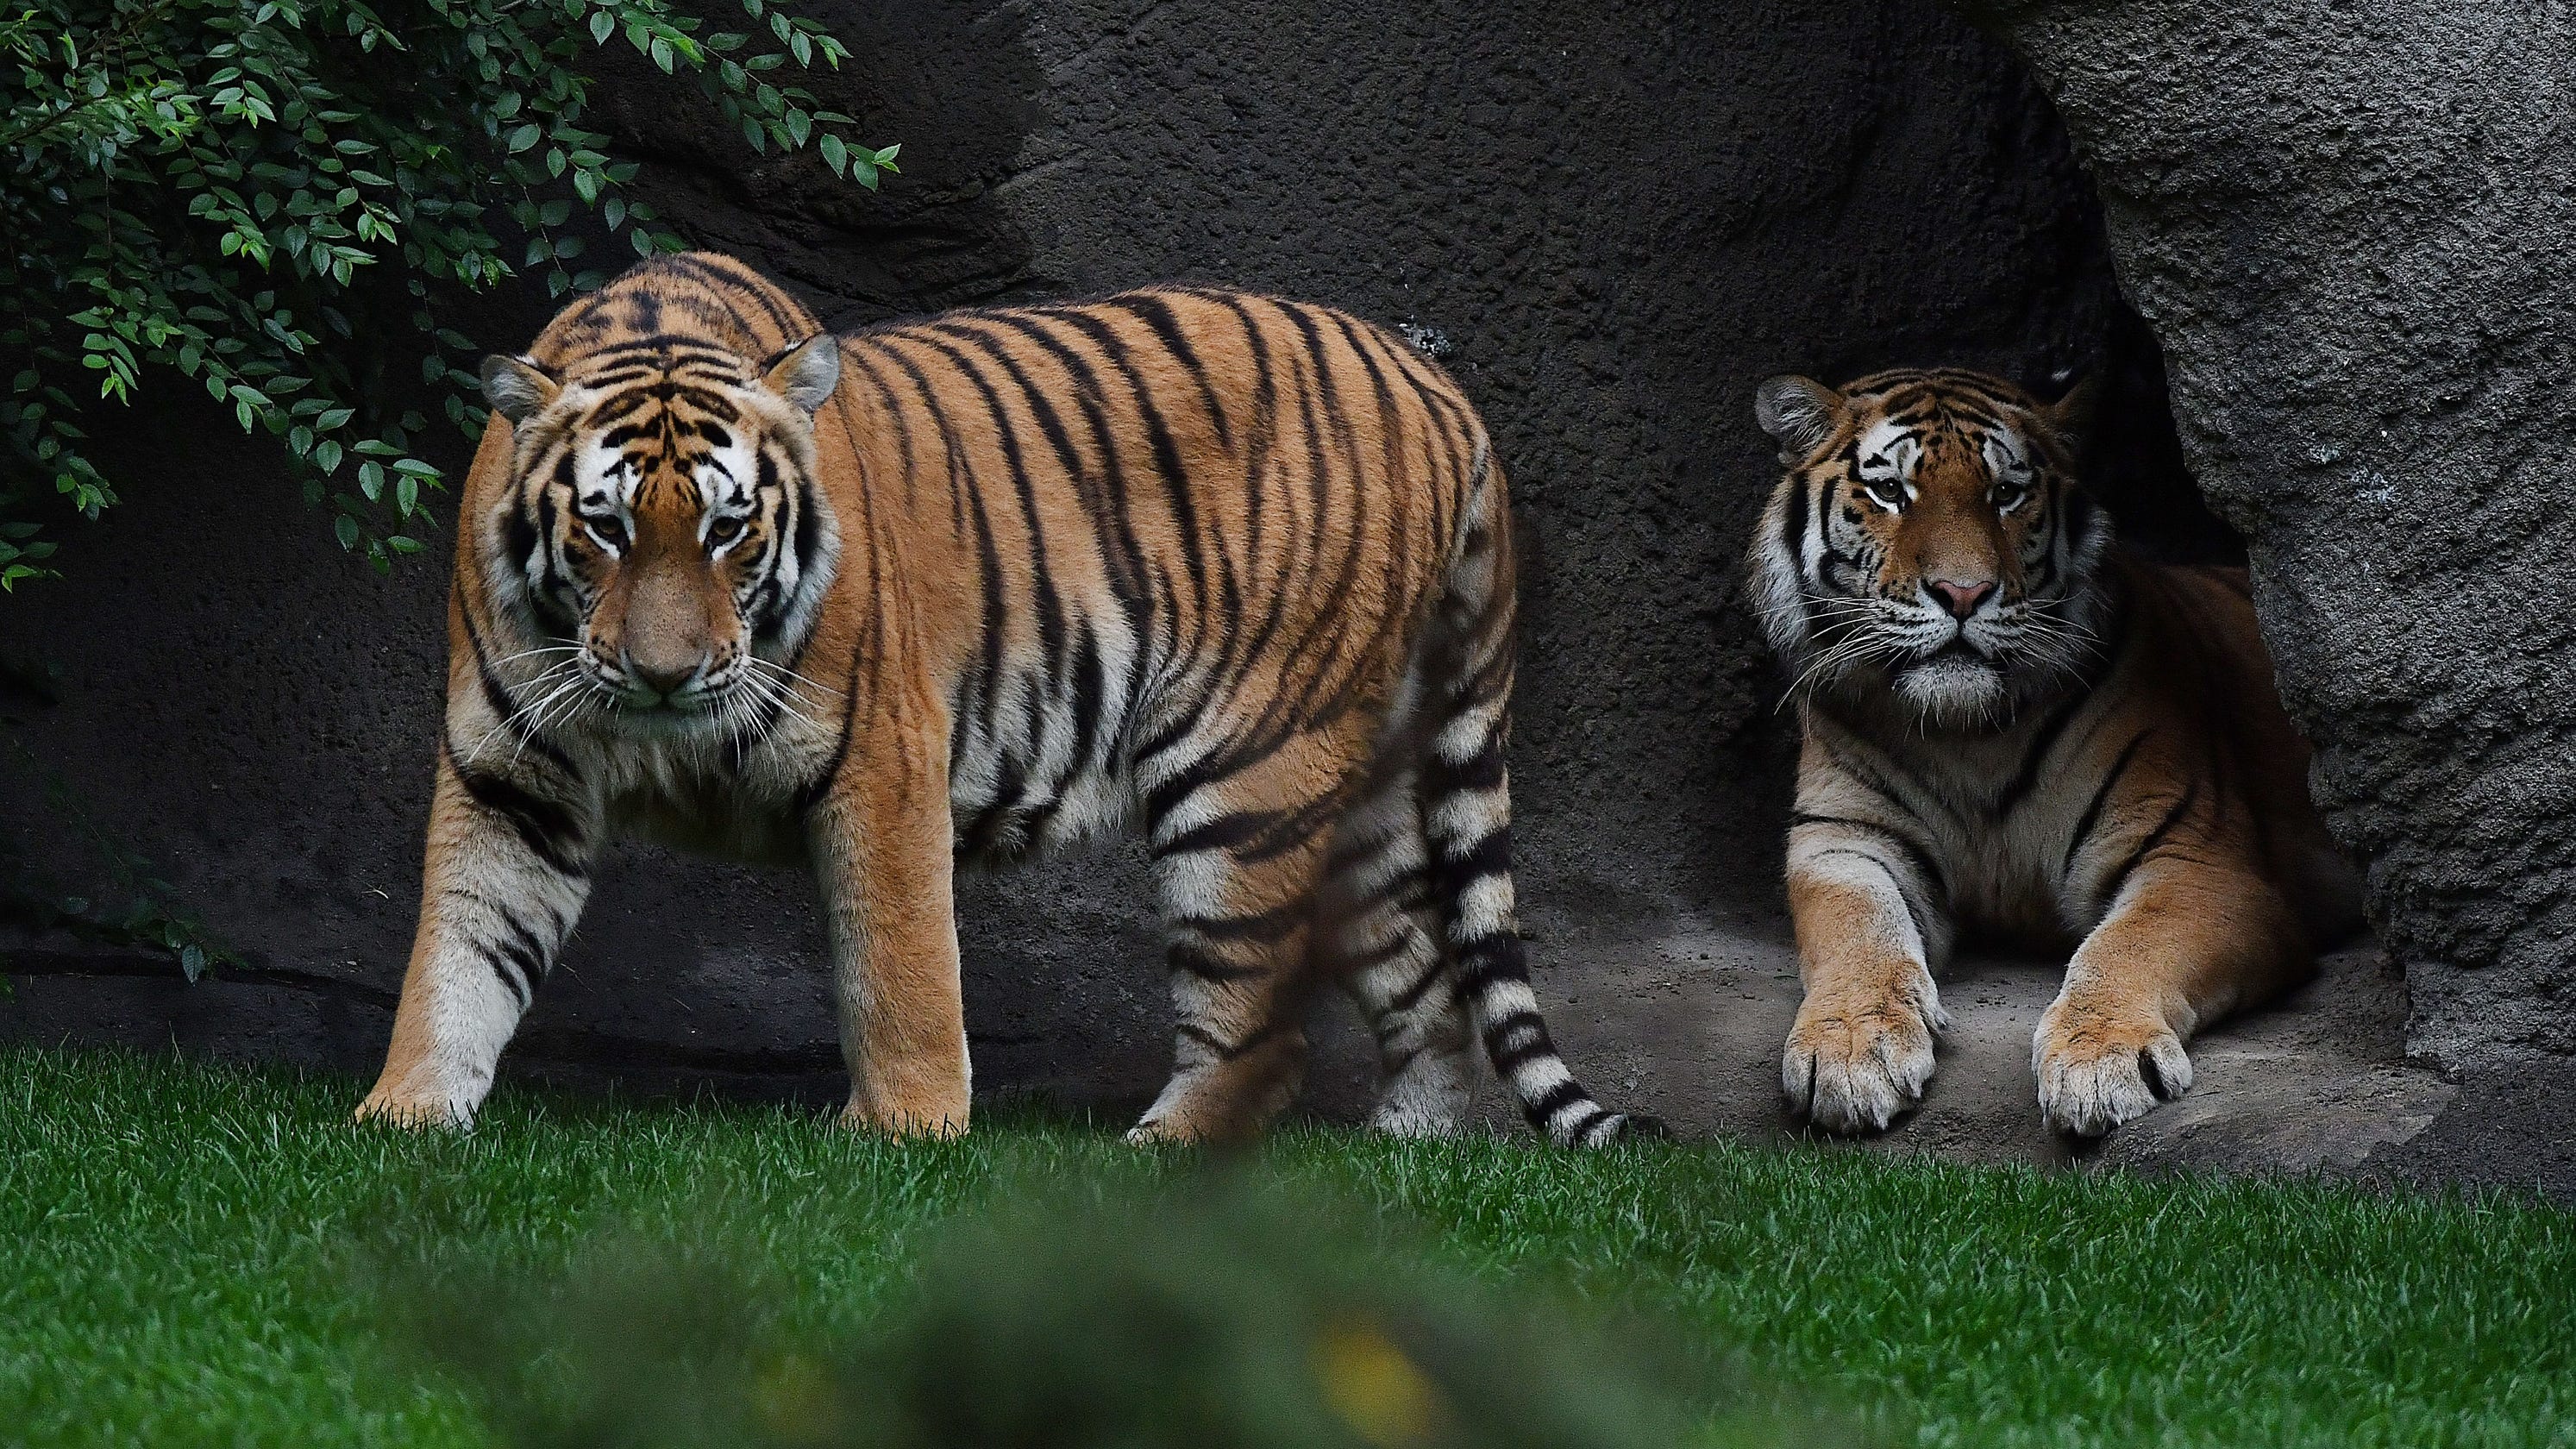 It's Opening Day for tigers at Detroit Zoo as new habitat unveiled